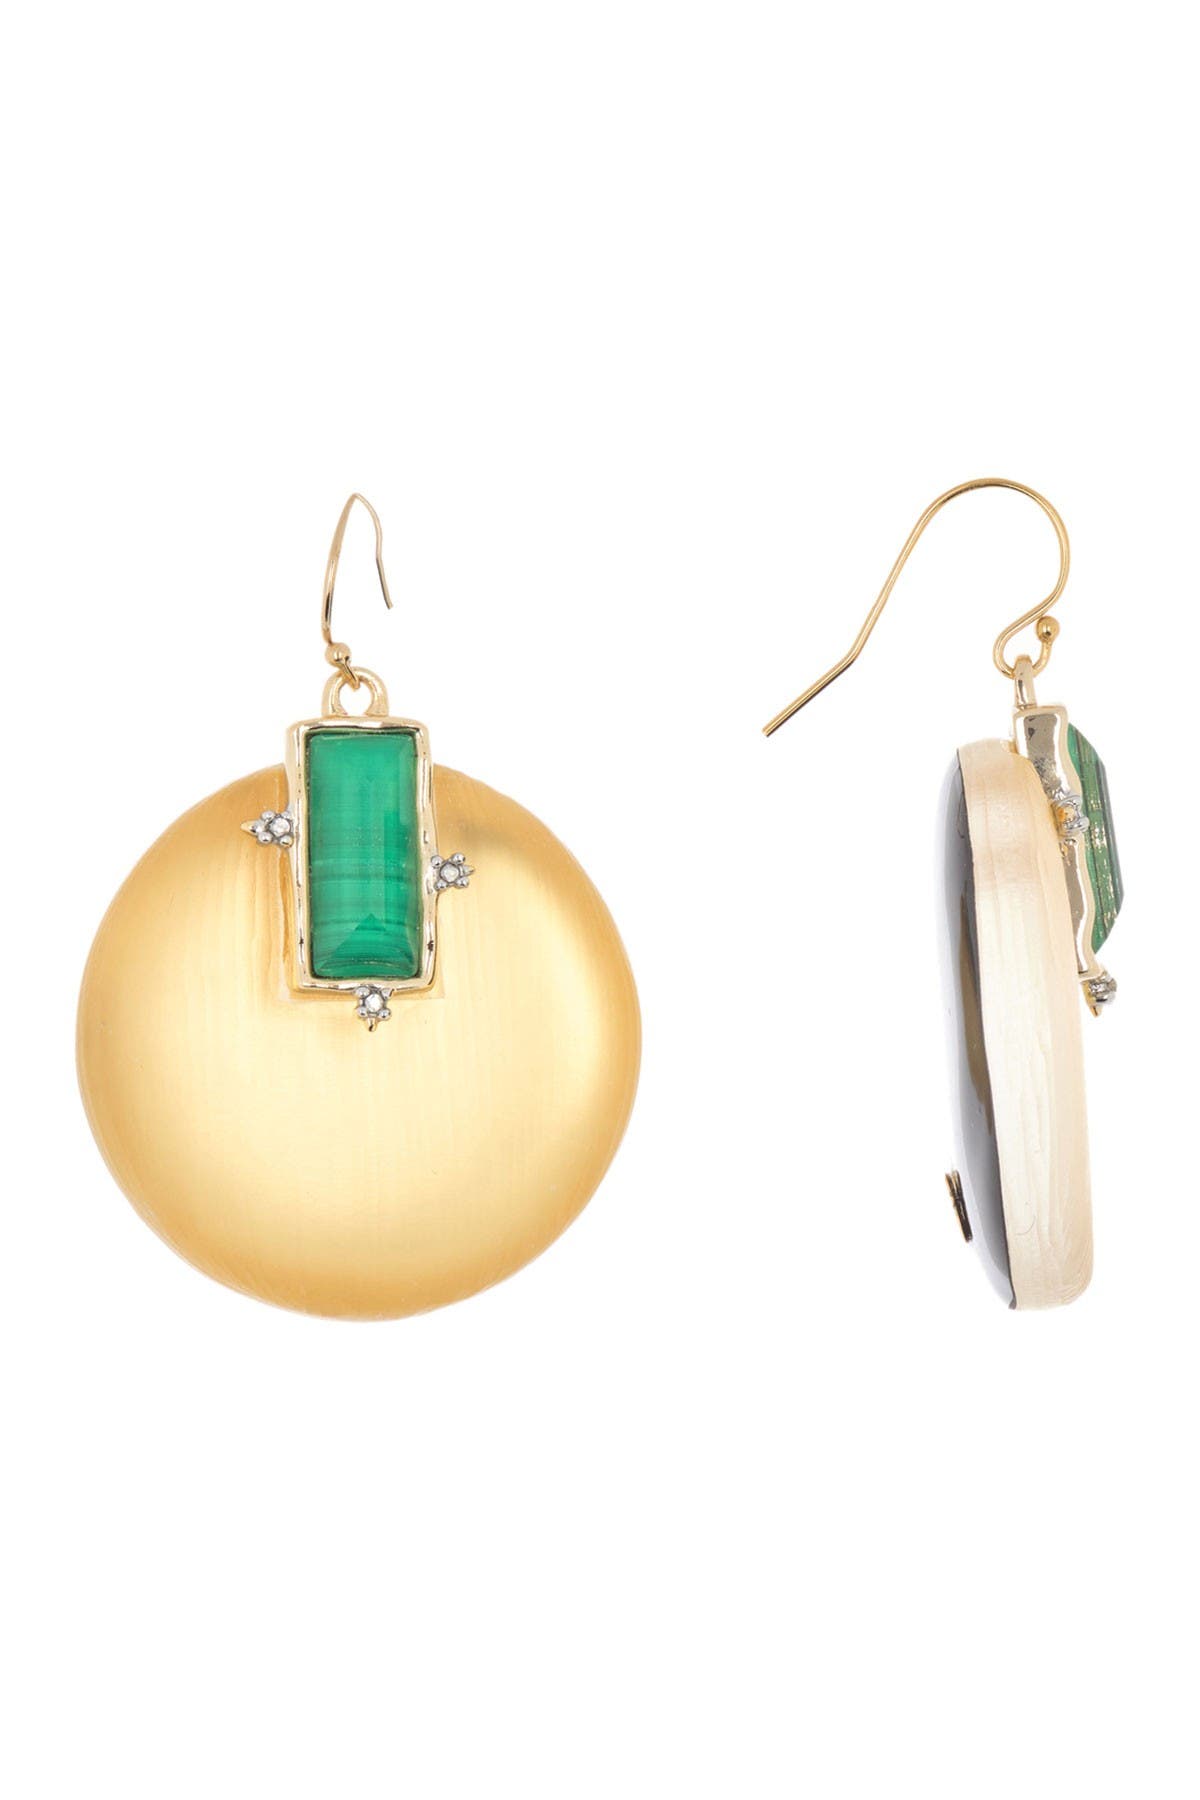 Alexis Bittar Stone Studded Circle Drop Earrings In Gold